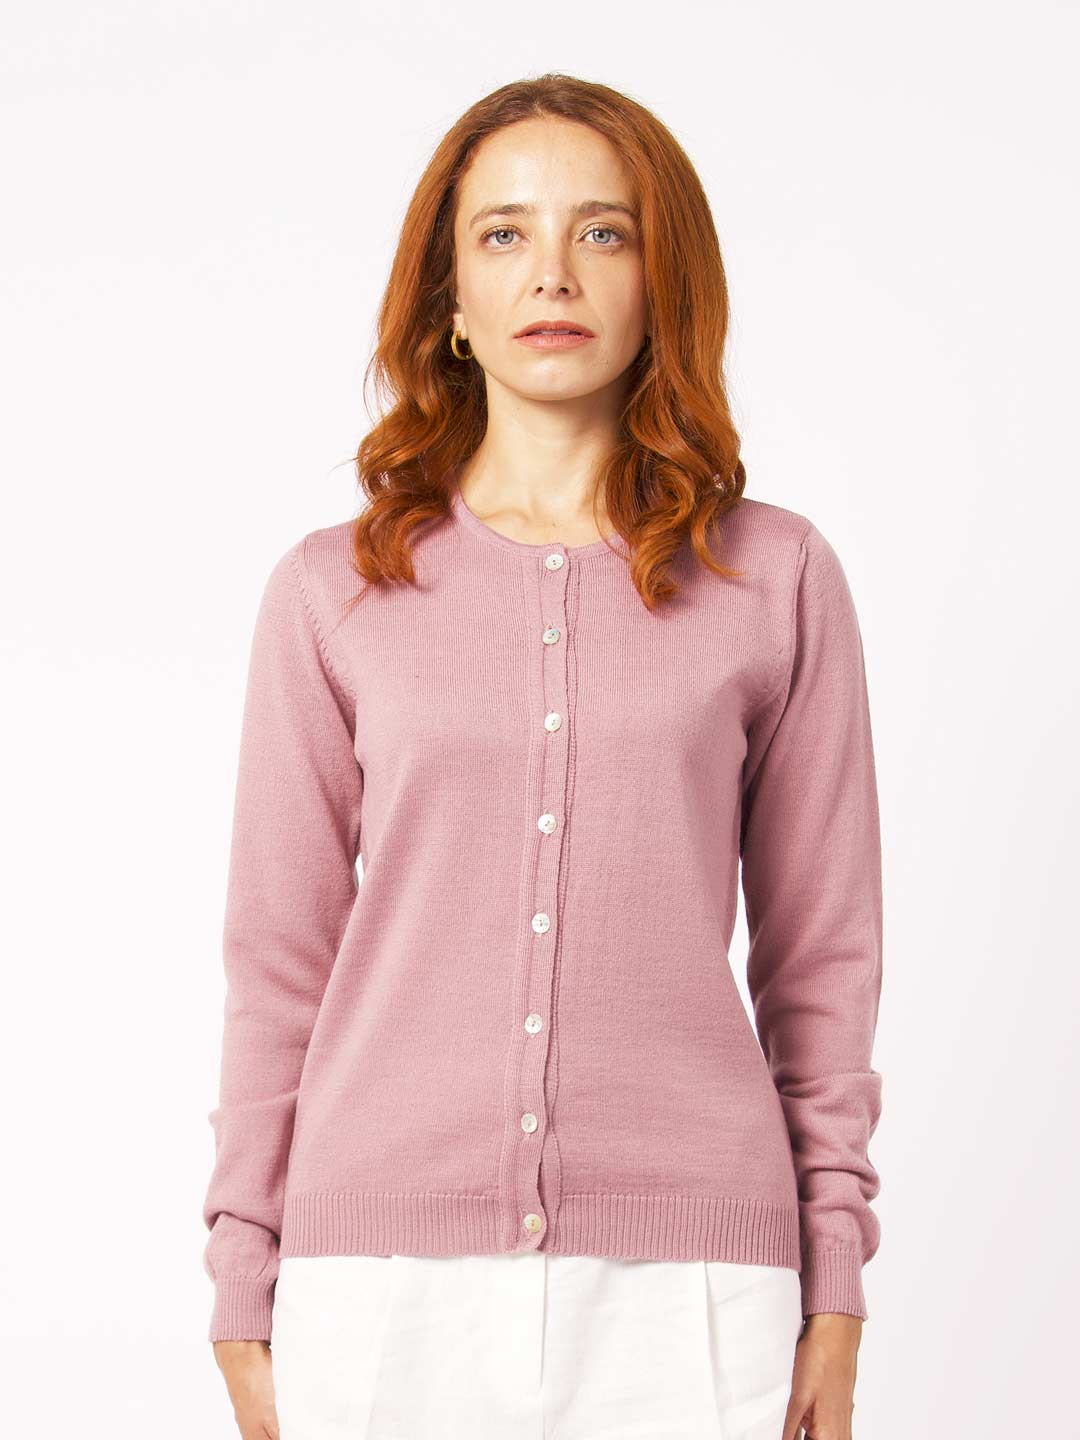 Cardigan with Round Neck in Merino Wool